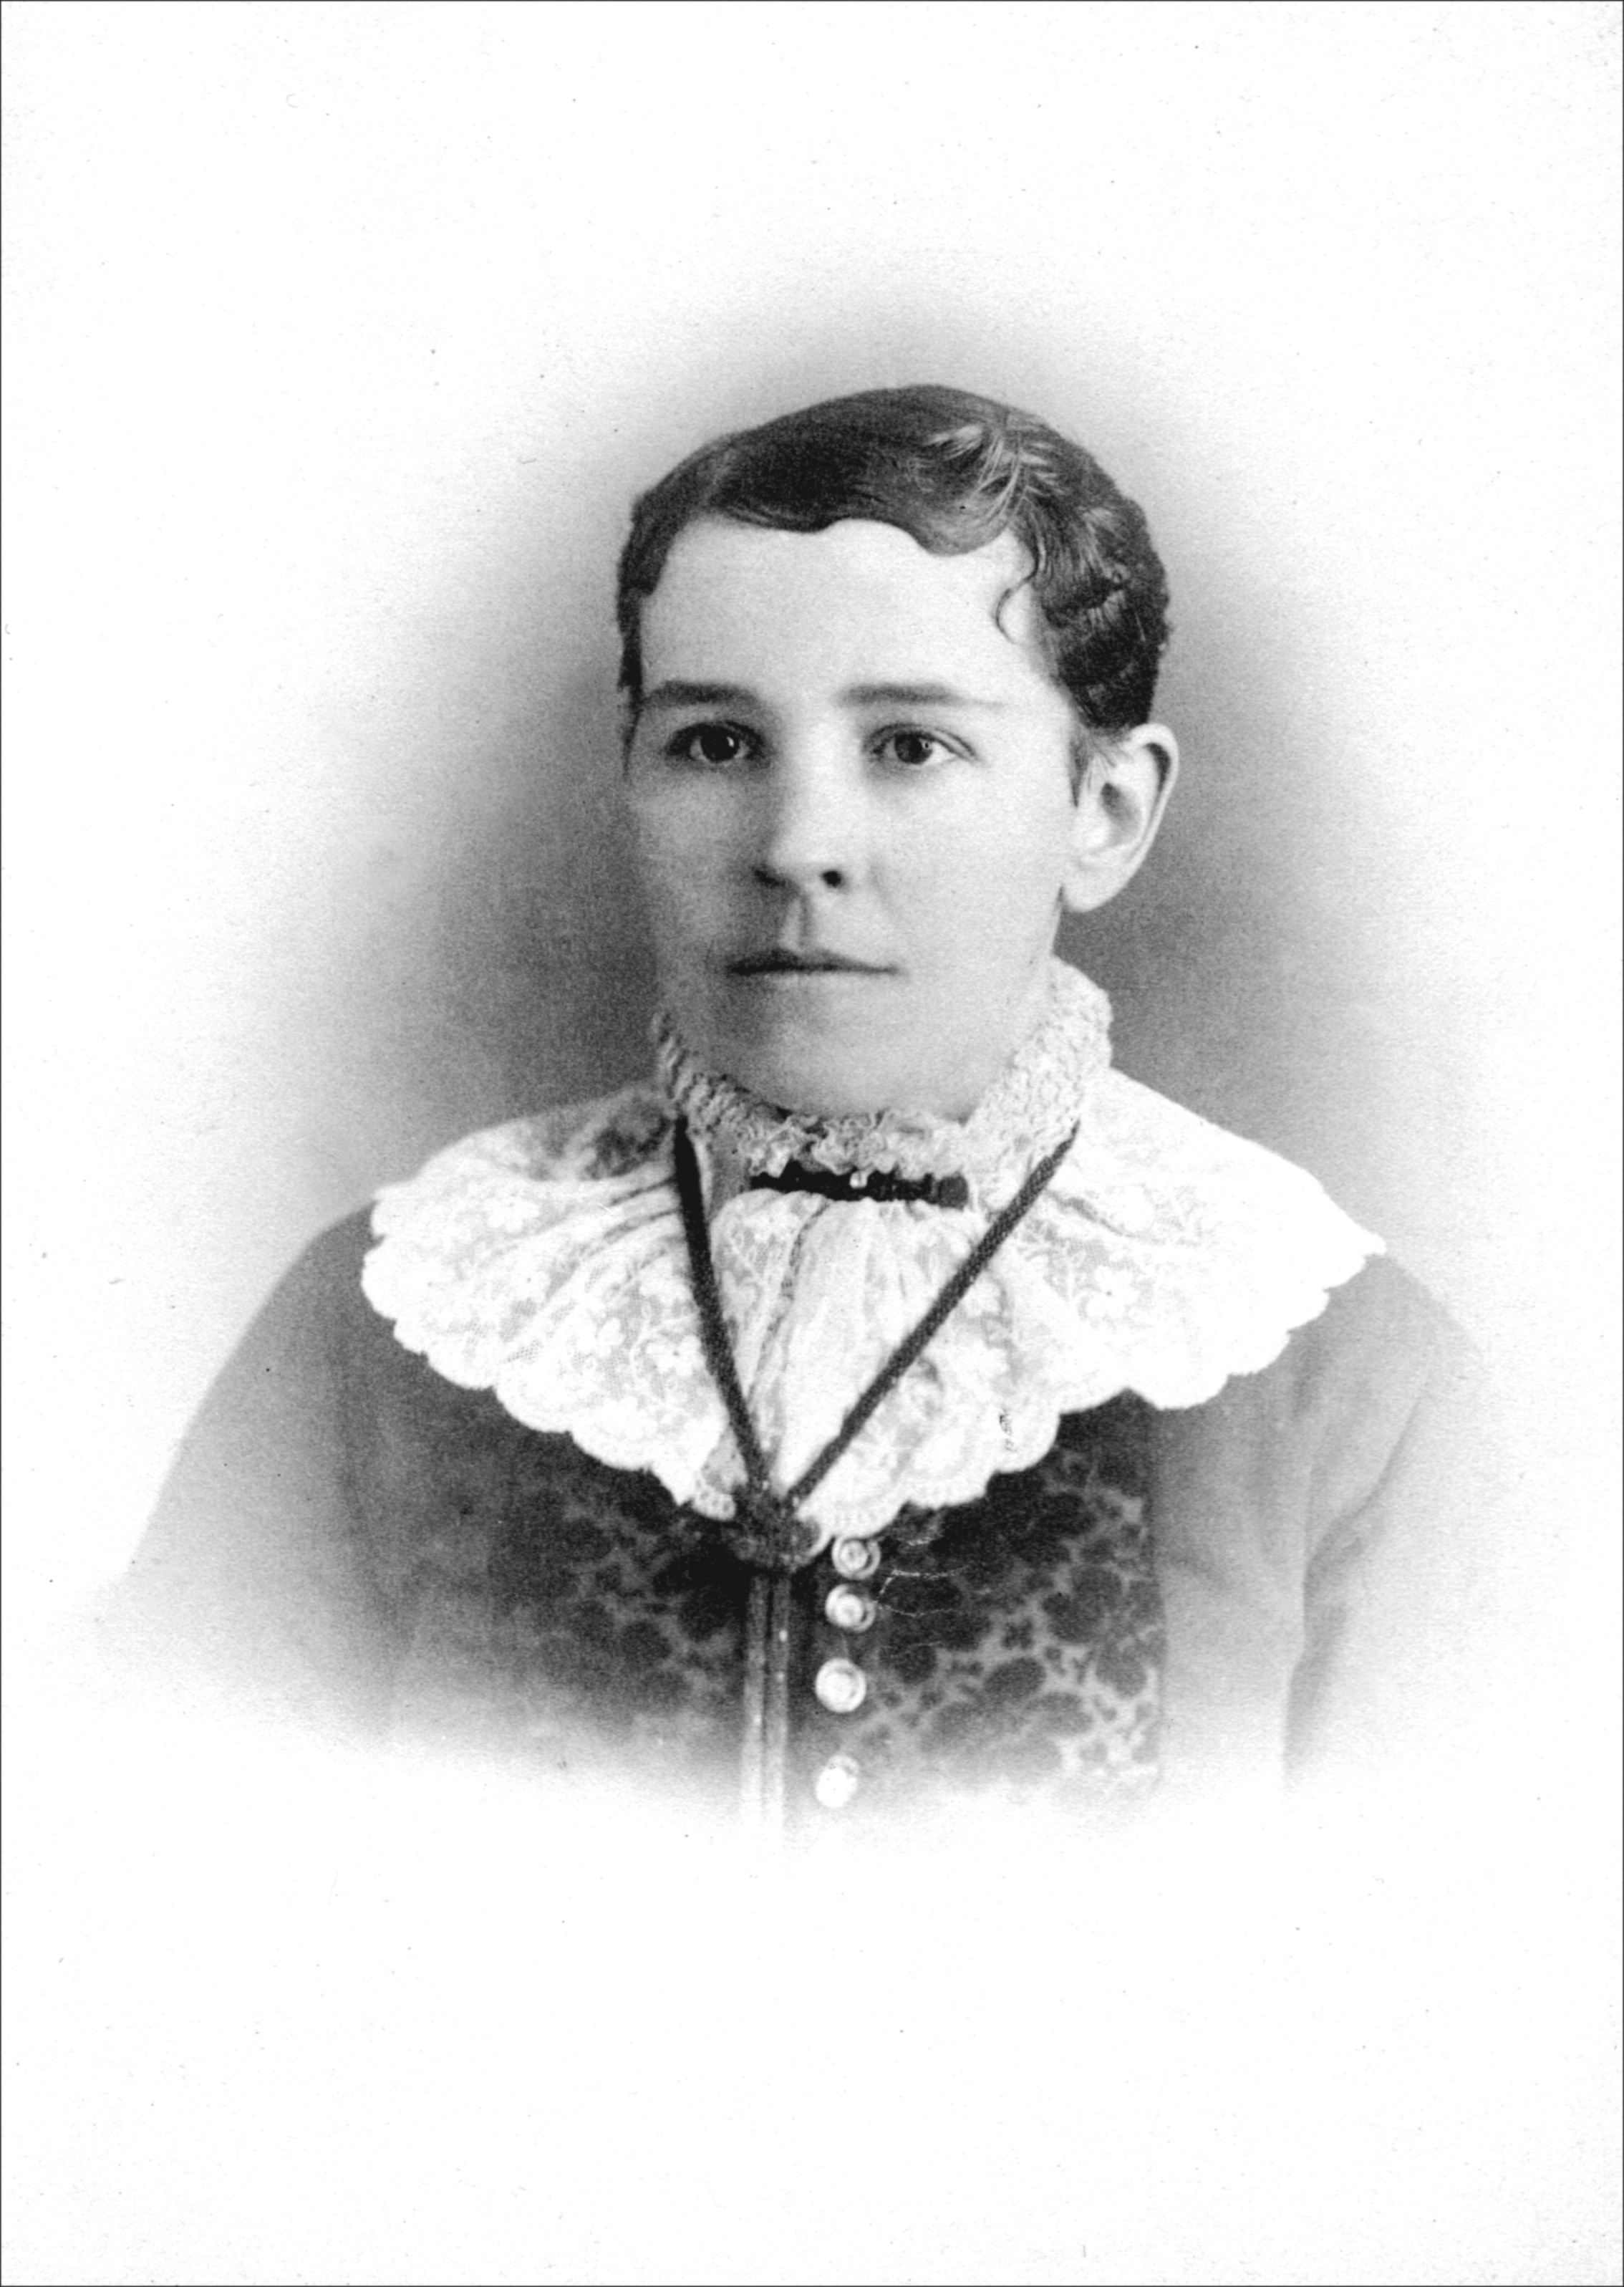 Photo of Willie Belle Rice